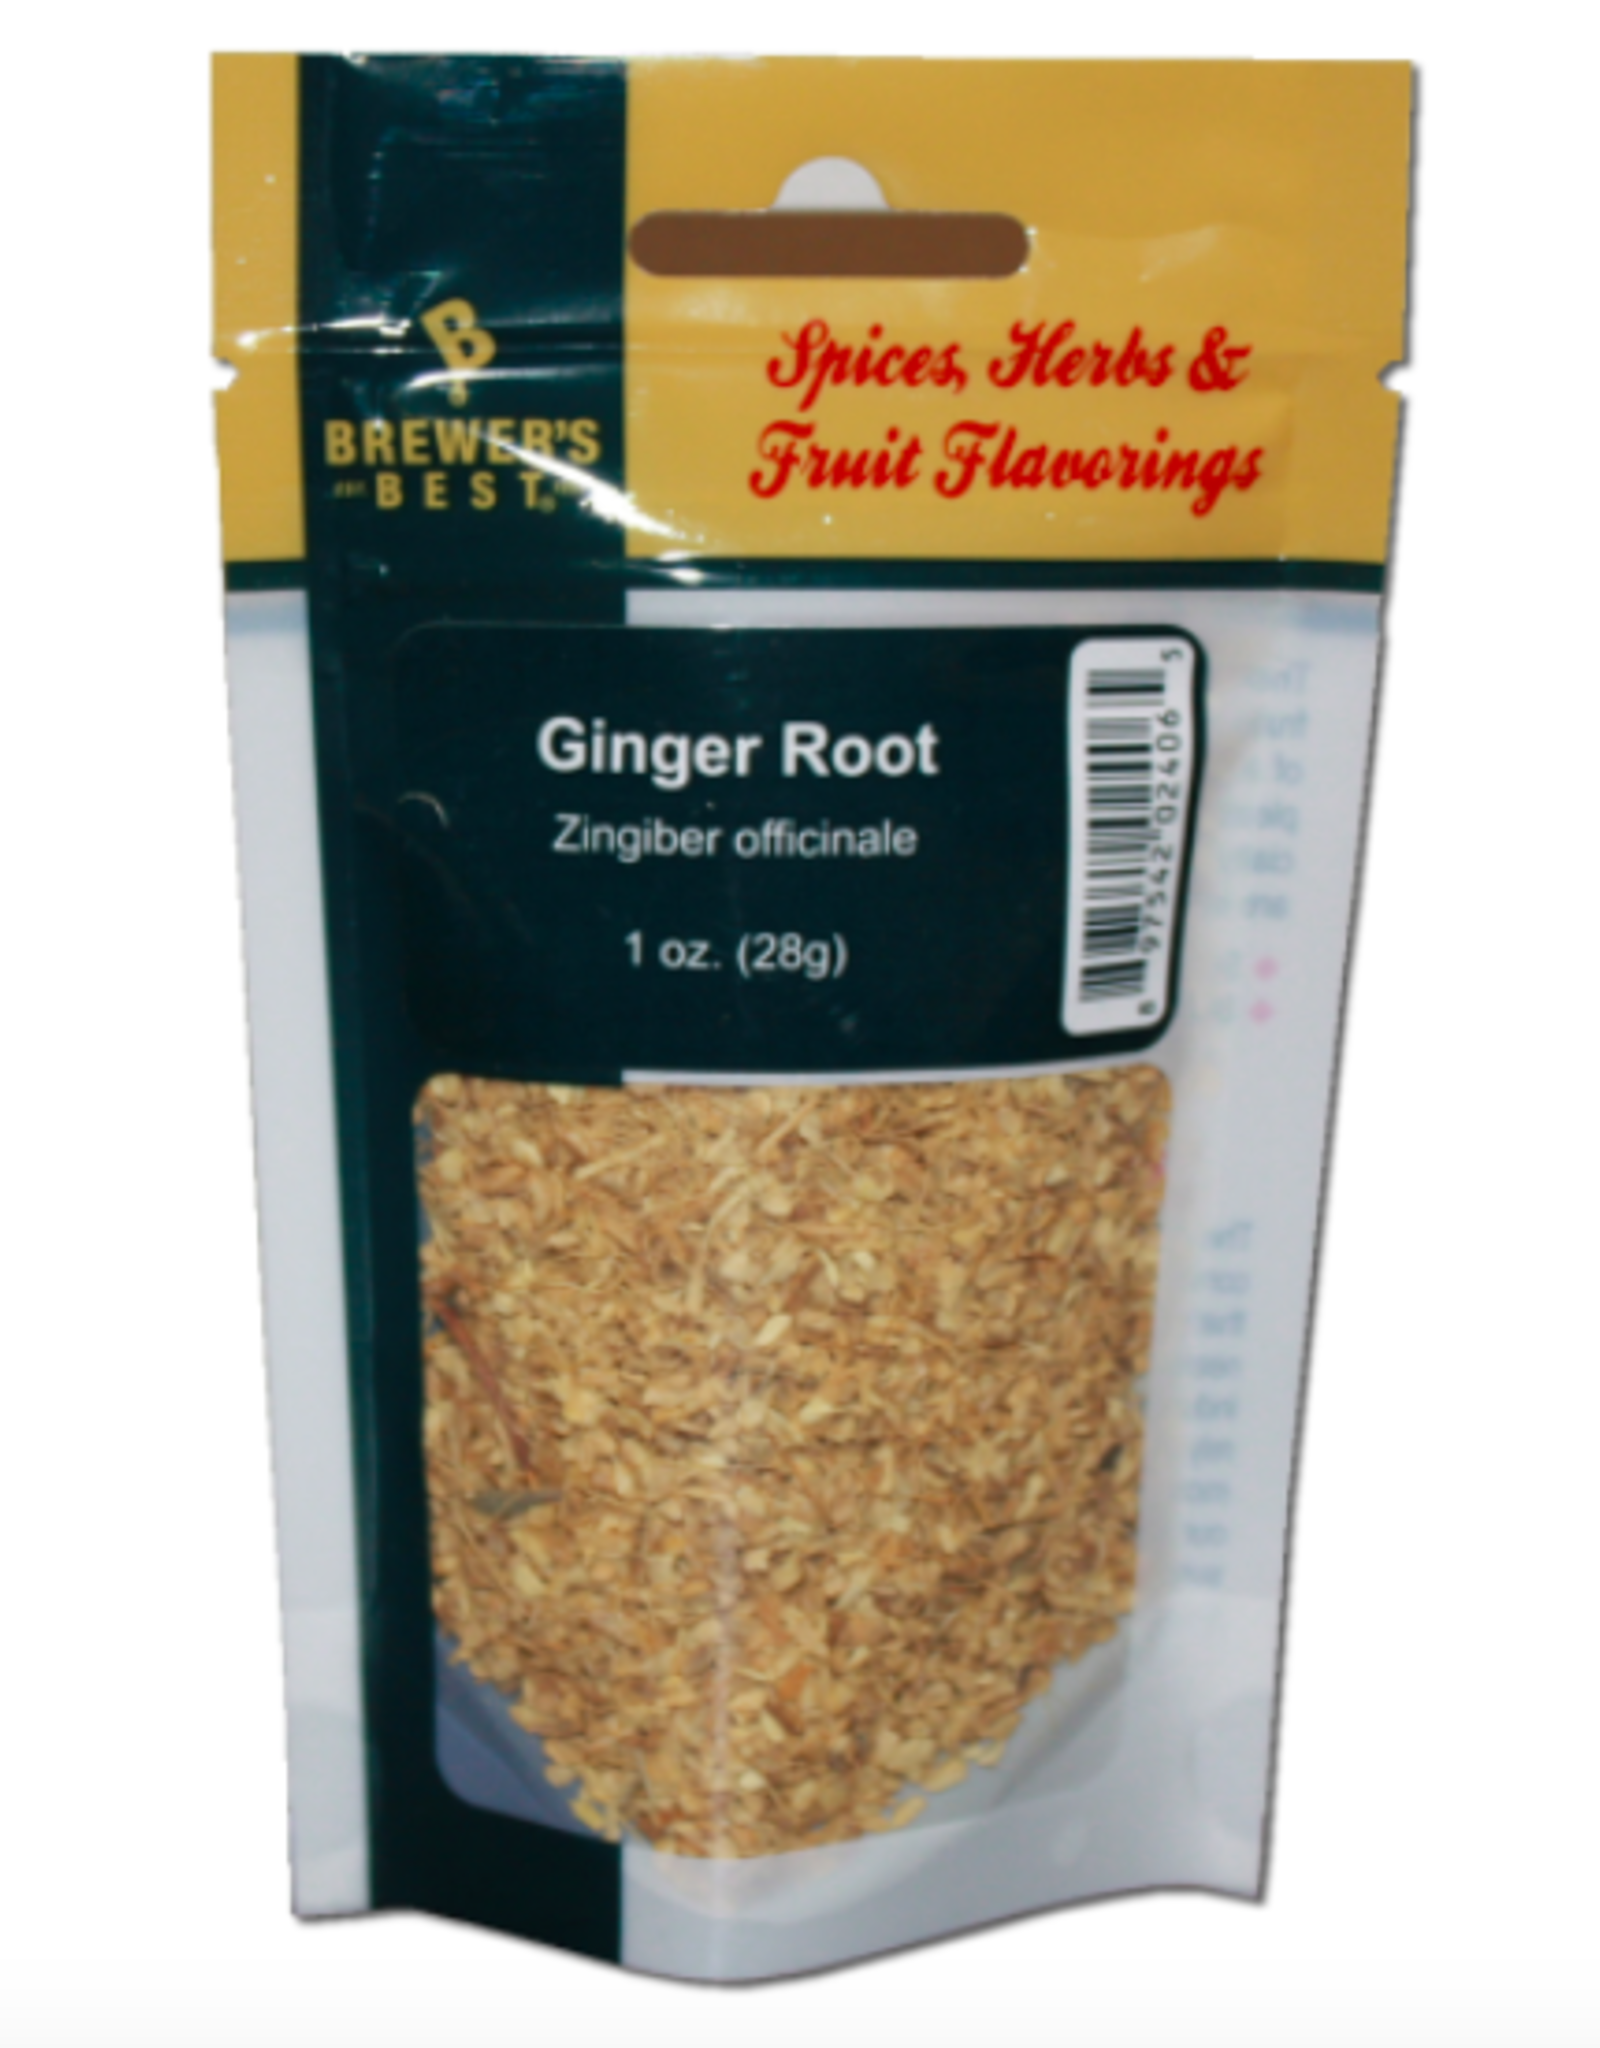 BREWER'S BEST GINGER ROOT 1 OZ